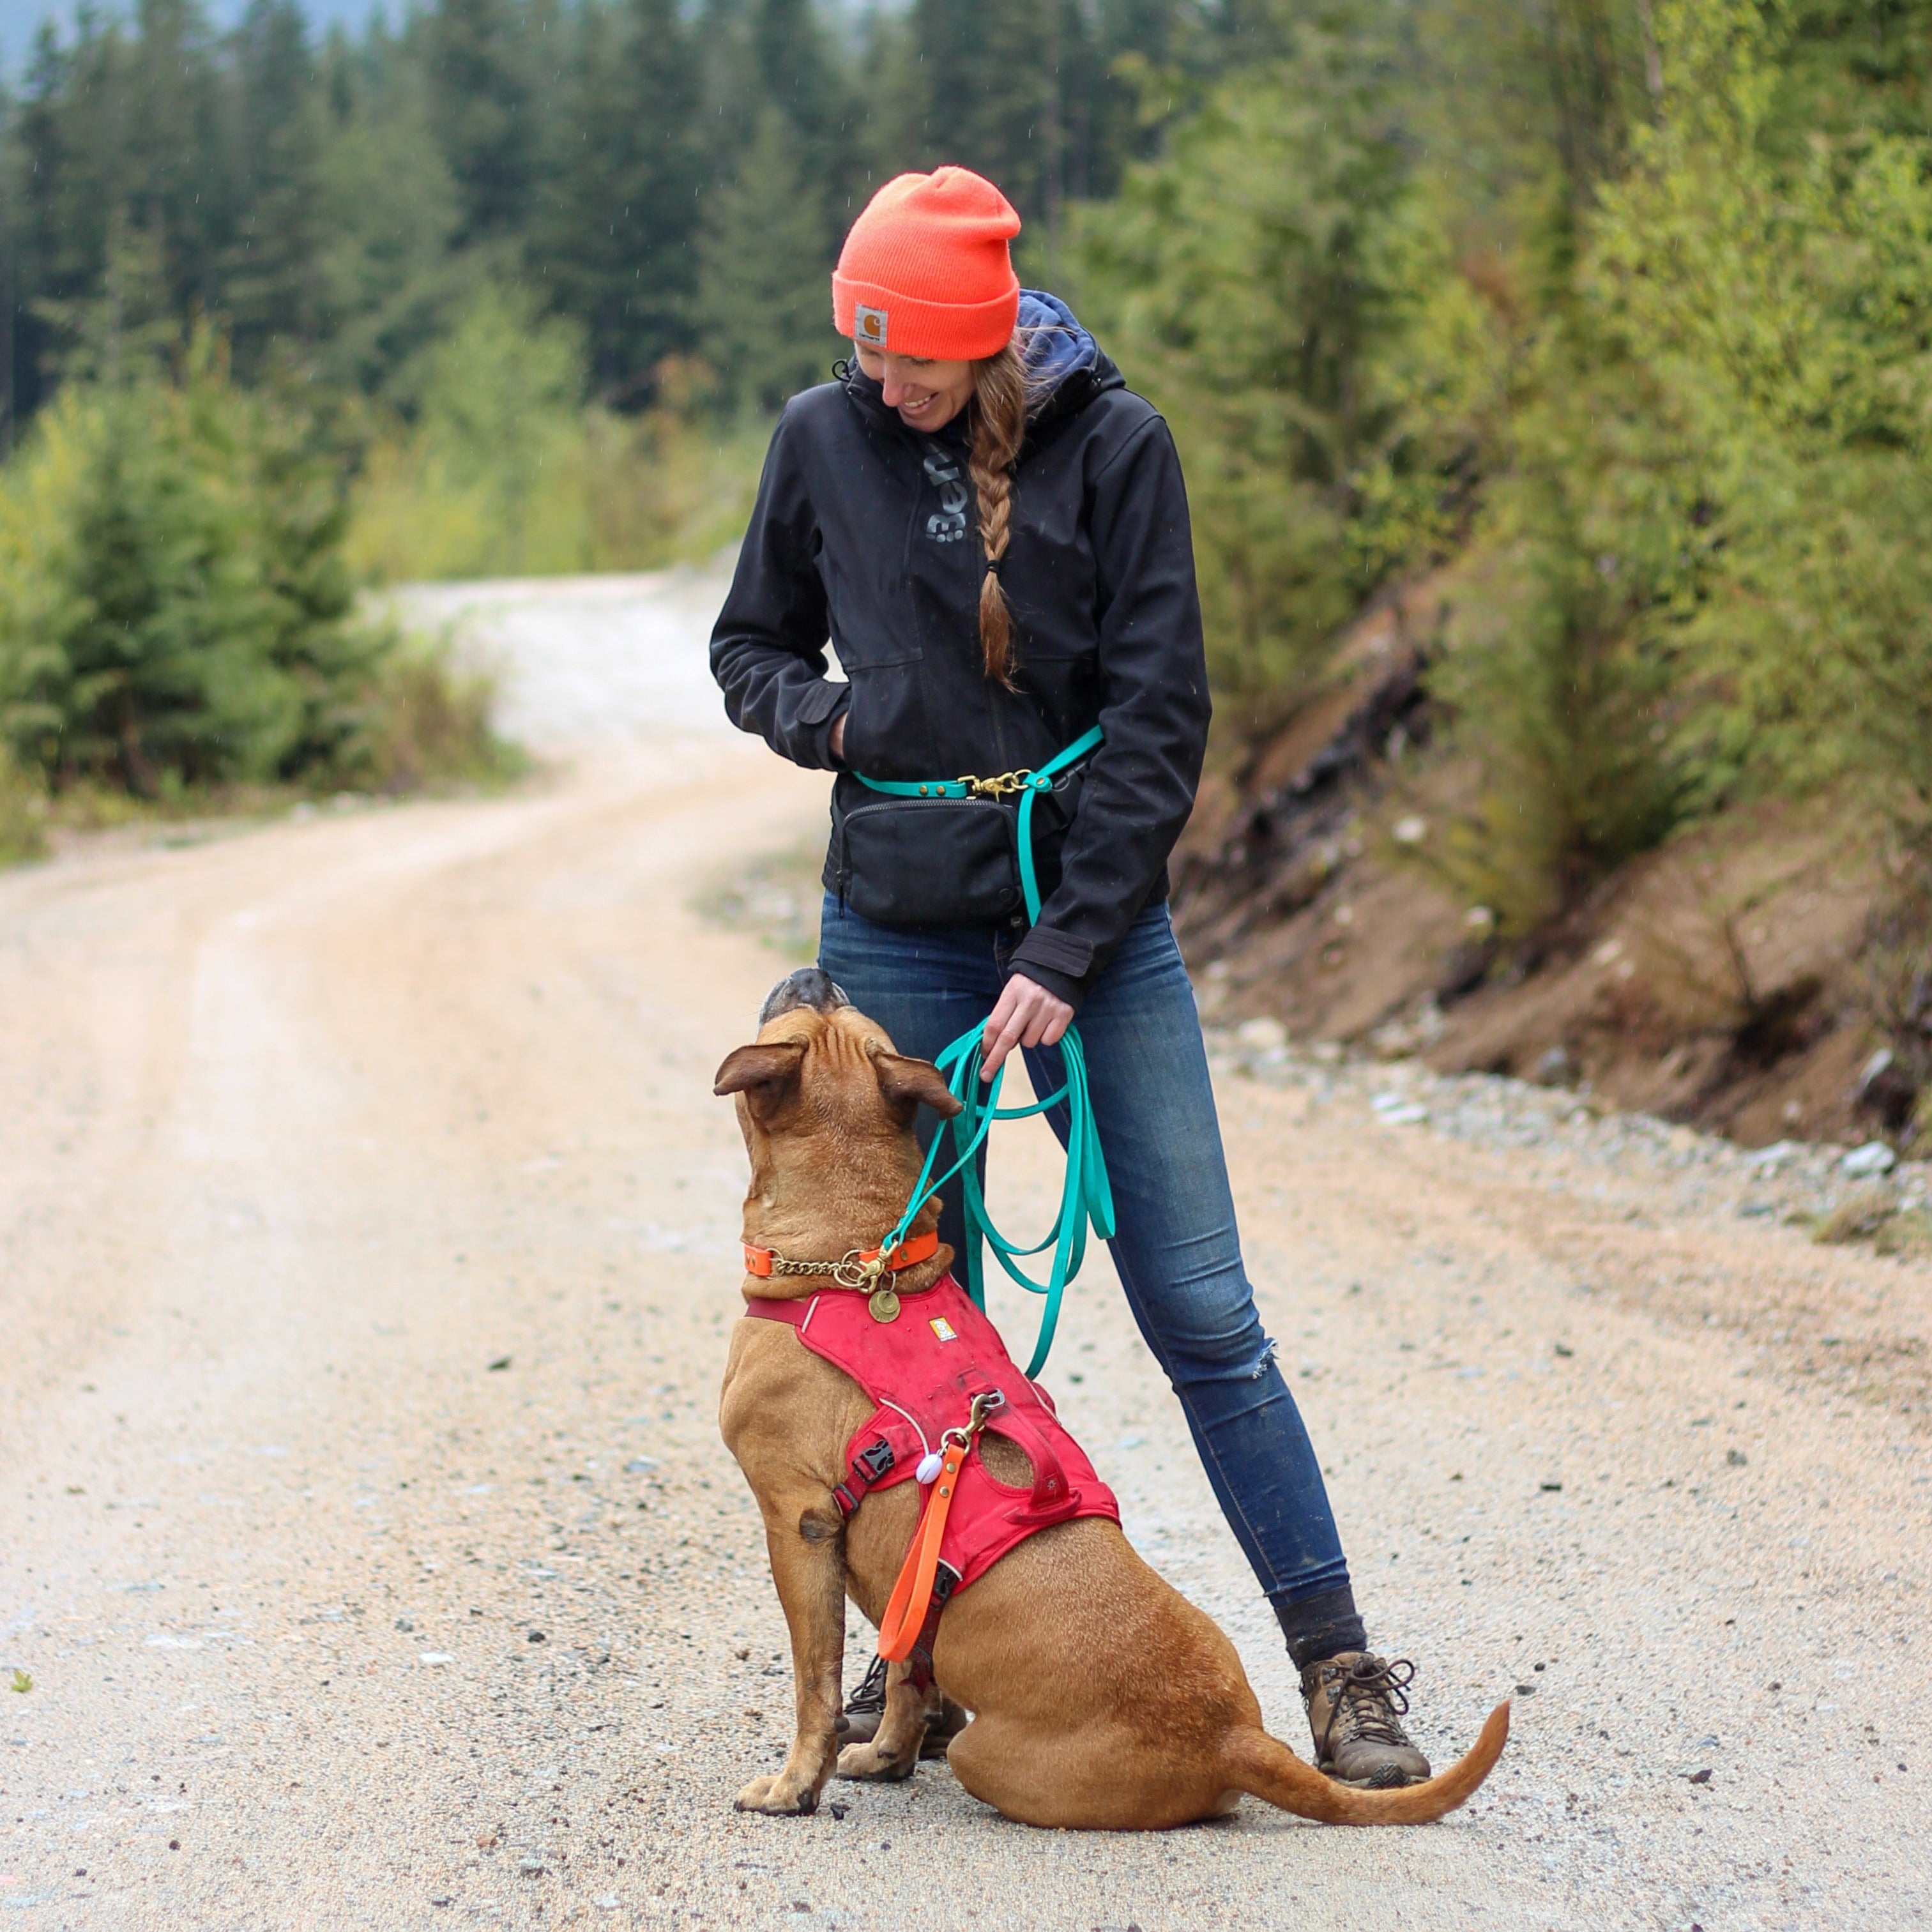 Woman training her Large Dog using a Waterproof Biothane Hands-Free Long Line